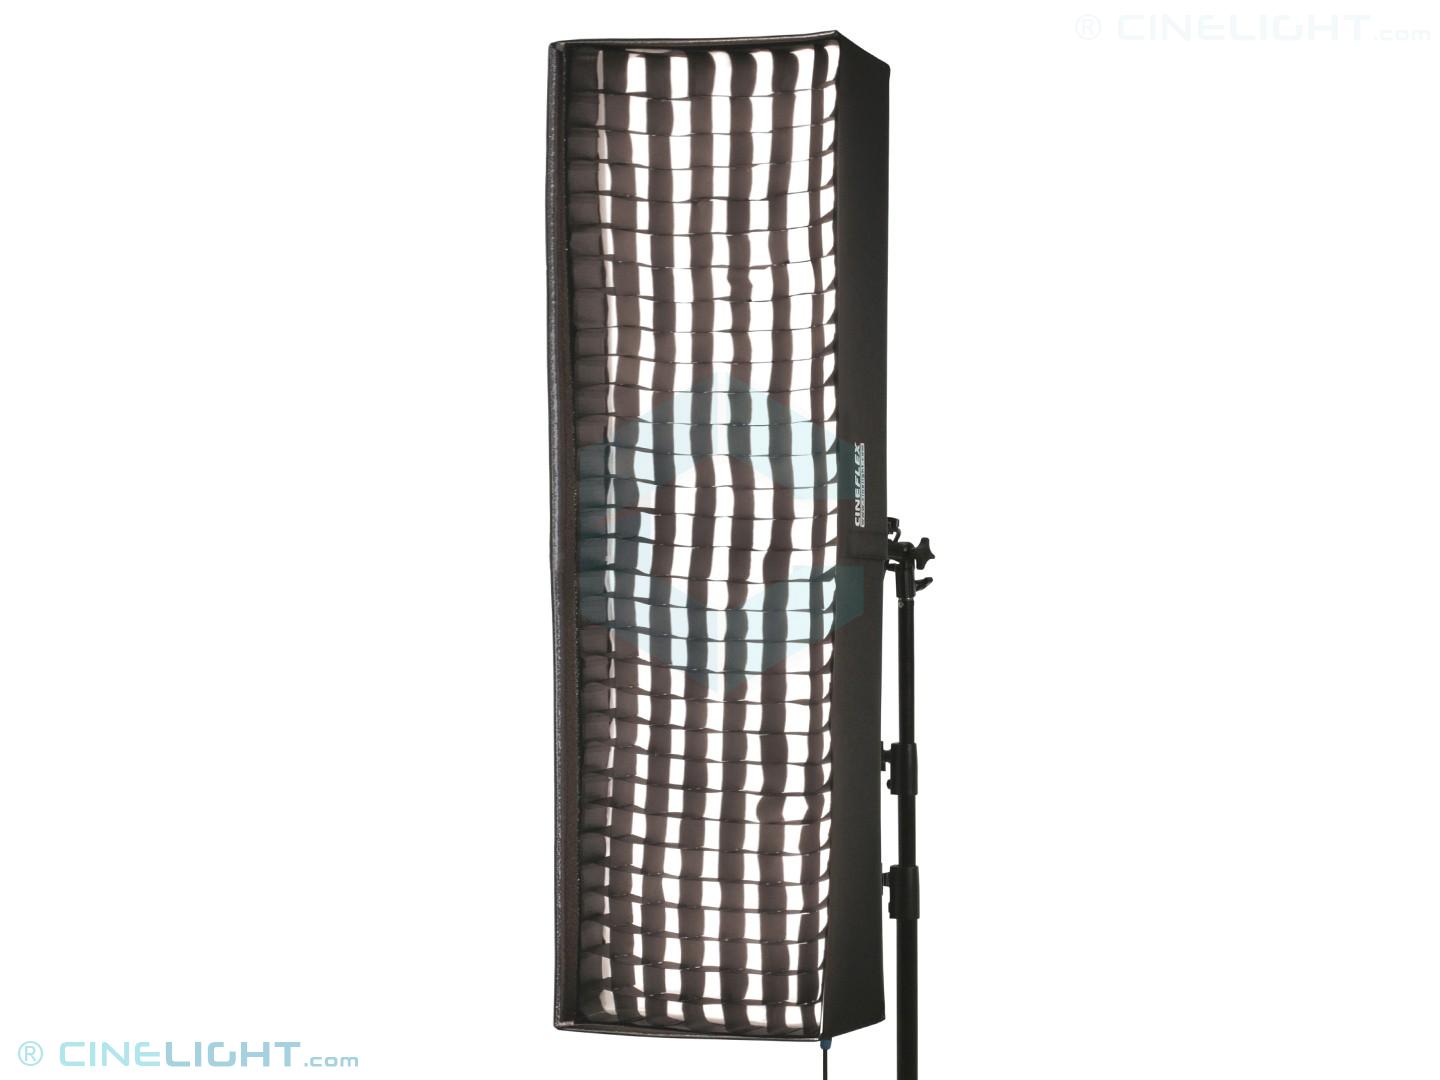 Softbox with grid